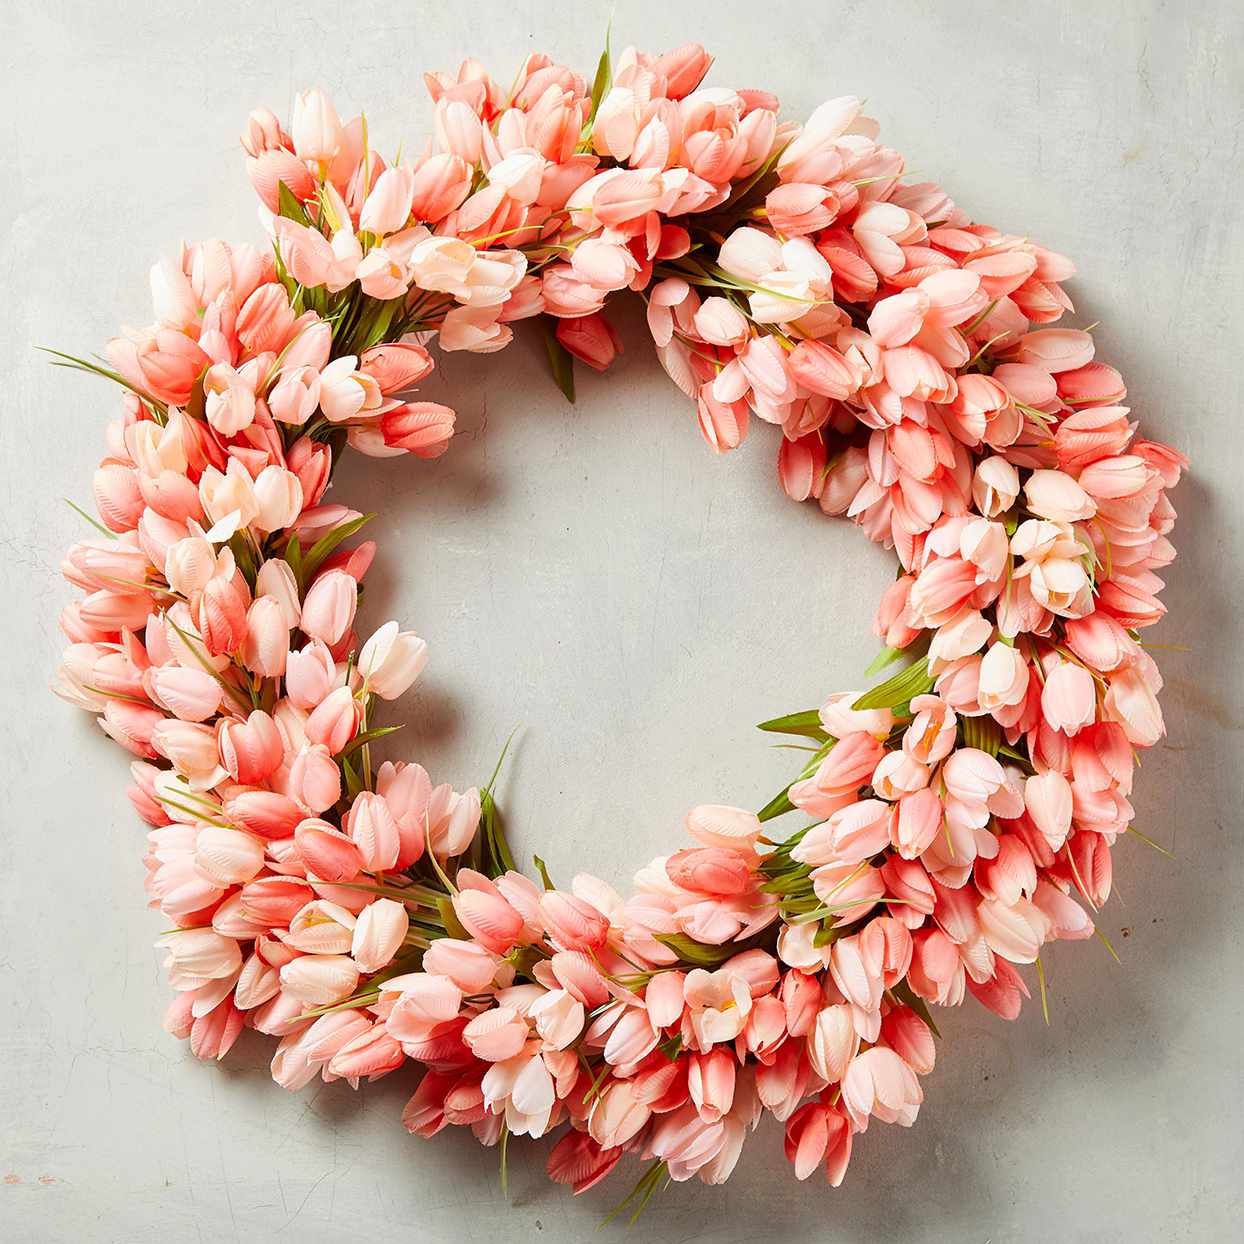 Make Your Own Tulip Wreath That's Perfect for Spring